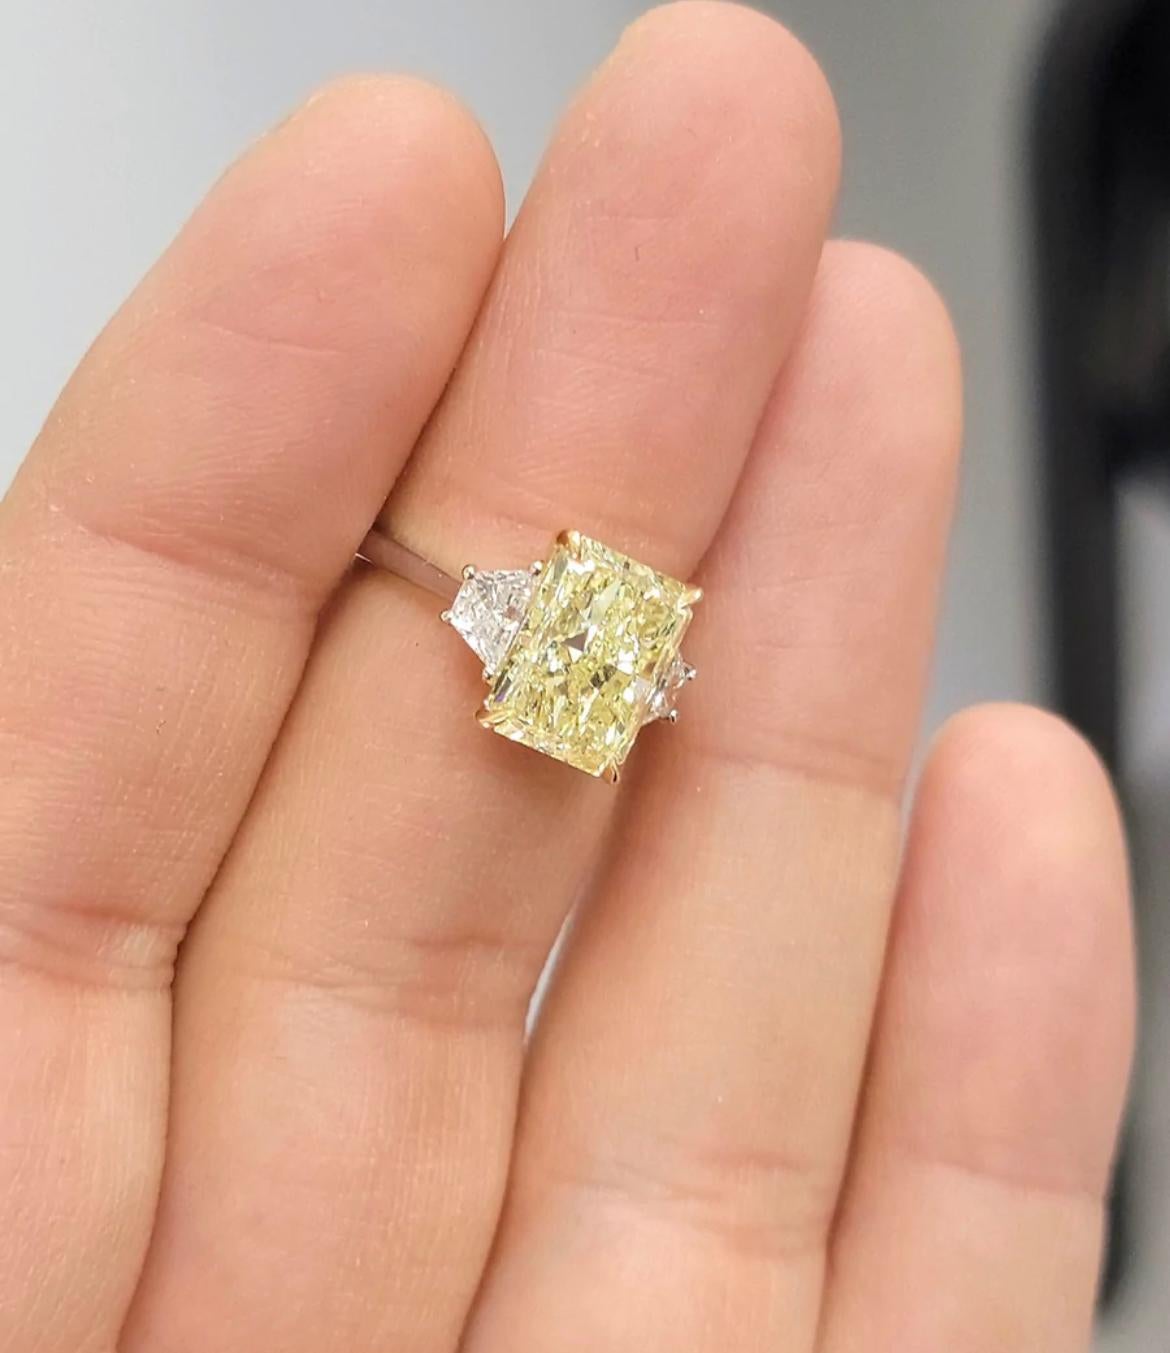 - Beautifully cut long radiant full of life and shine, with a very desirable 1.3 ratio
- 100% Eye clean
- Set in Platinum and 18kt YG with 0.66ct tw E VS Brilliant cut Trapezoids 